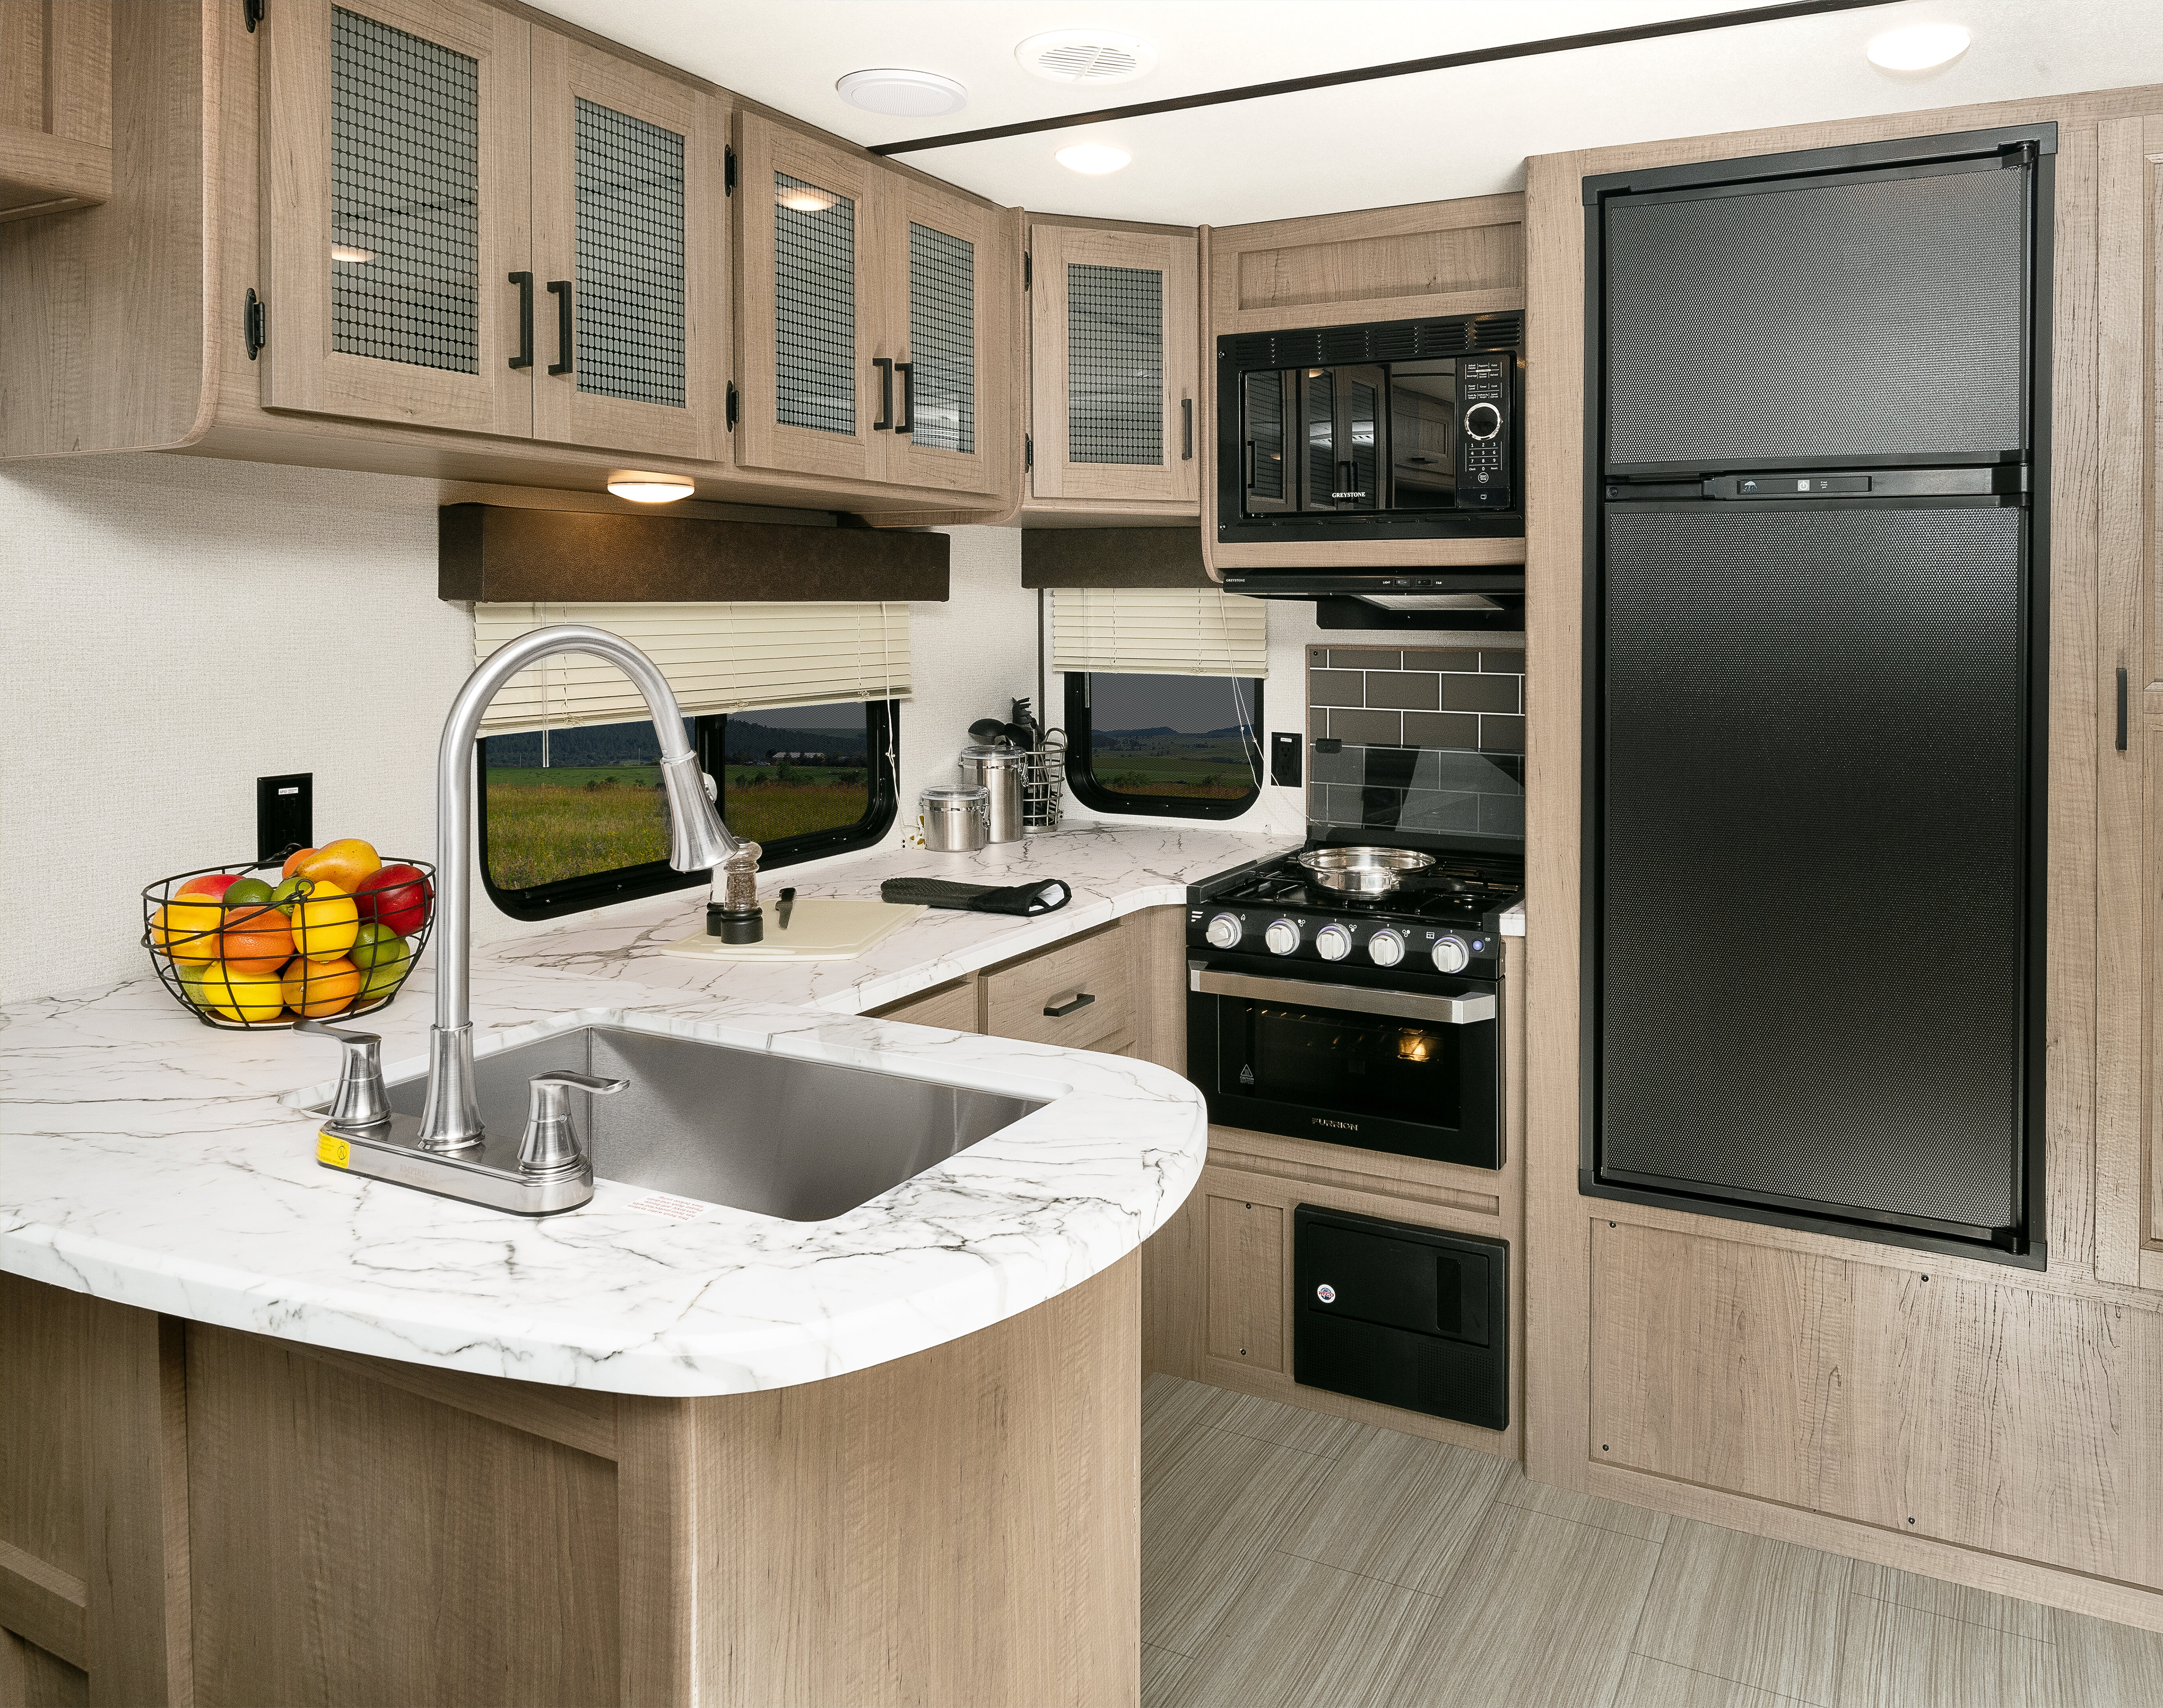 Fifth Wheel Rvs With Bunkhouses